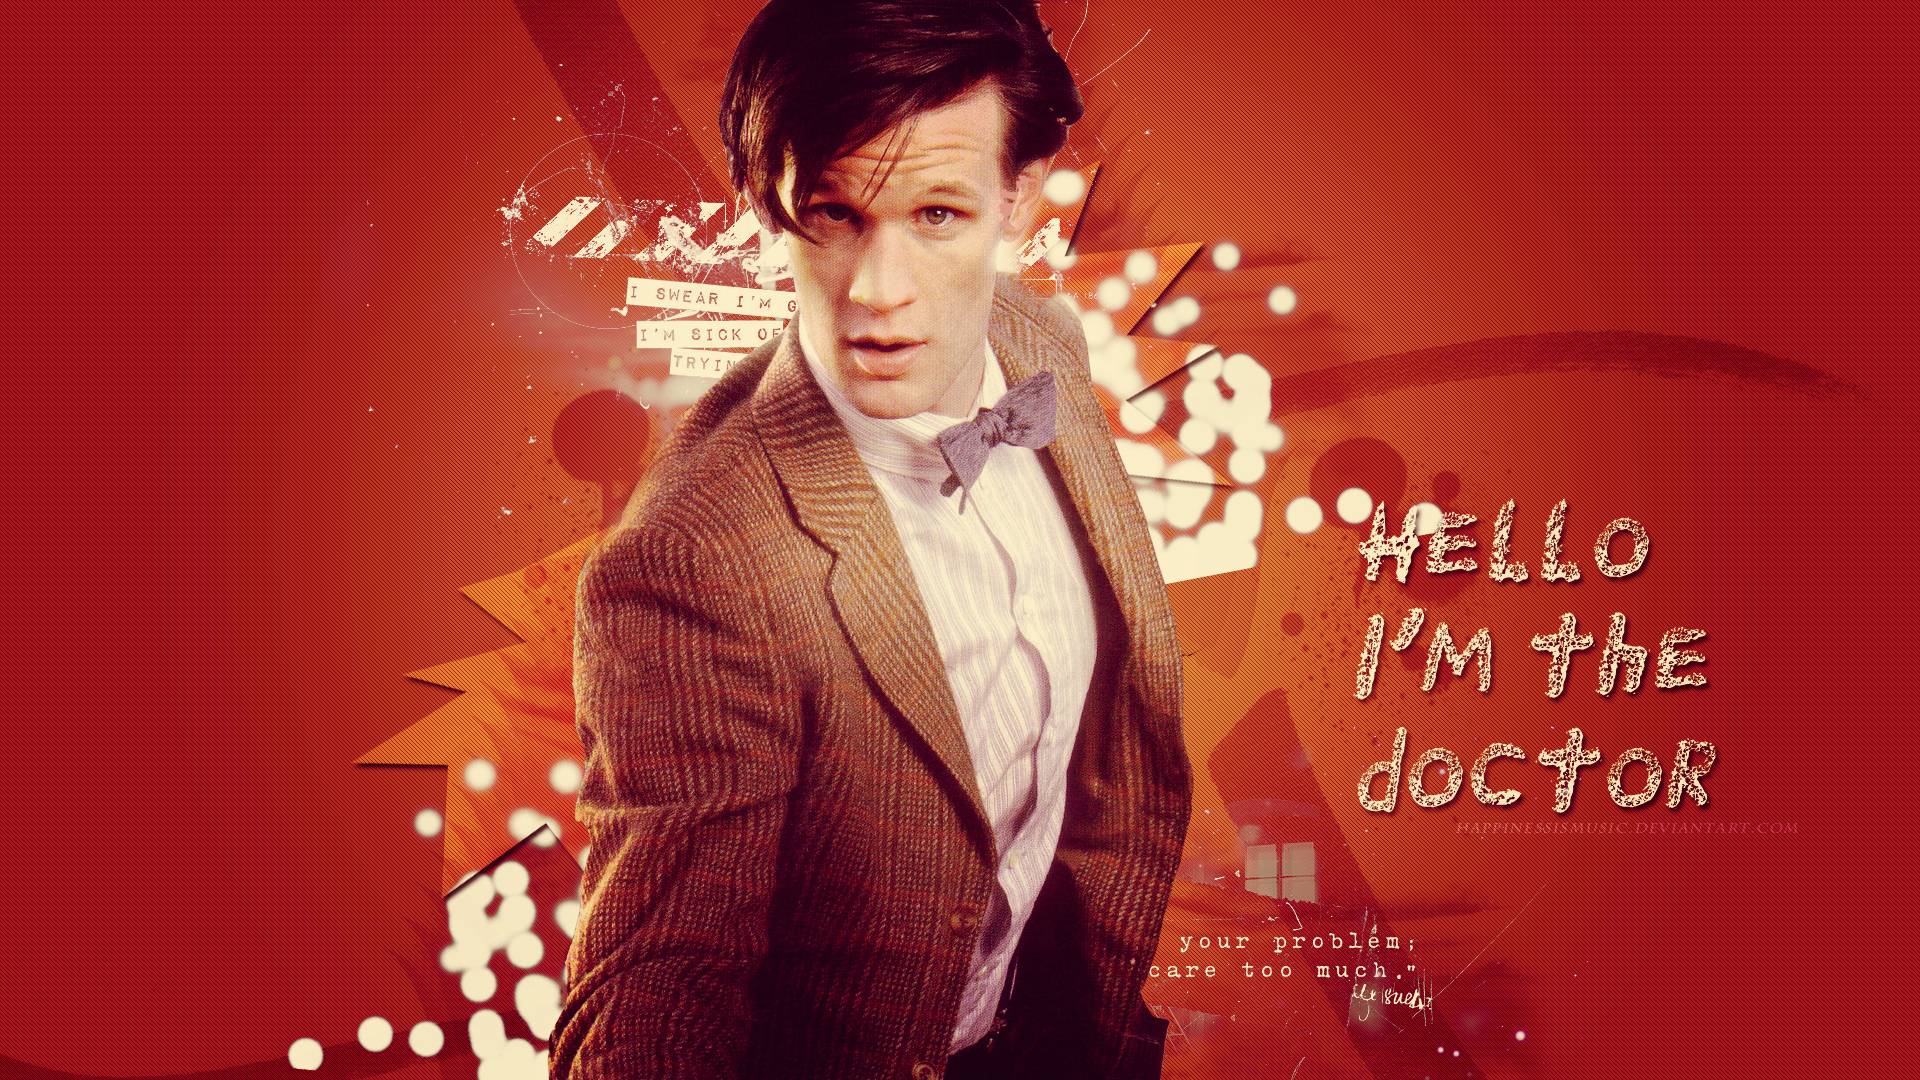 More Like The eleventh Doctor Wallpaper 2